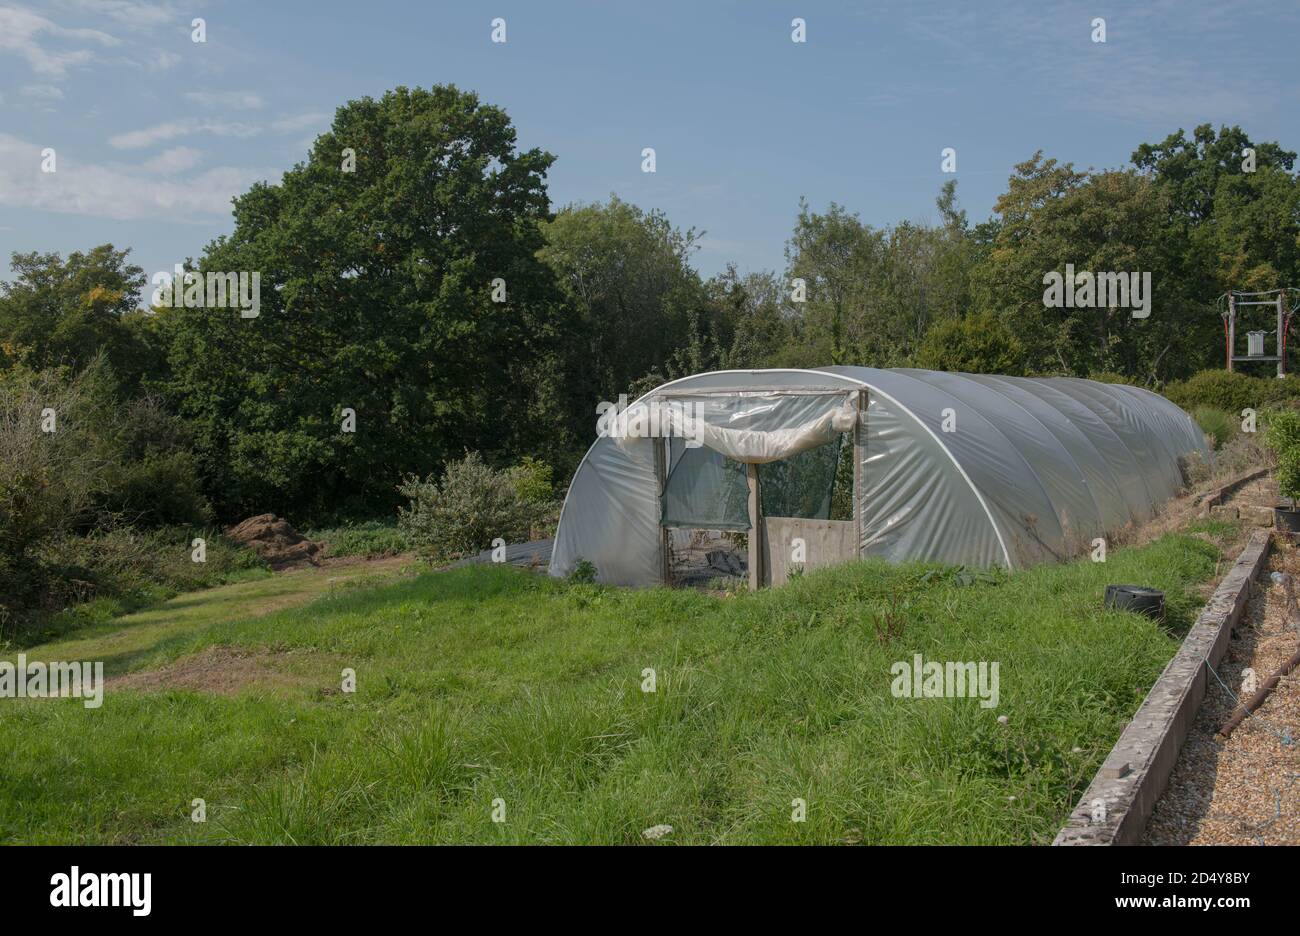 Polytunnel for Propagating Plants and Vegetables on an Allotment in a Vegetable Garden in Rural West Sussex, England, UK Stock Photo